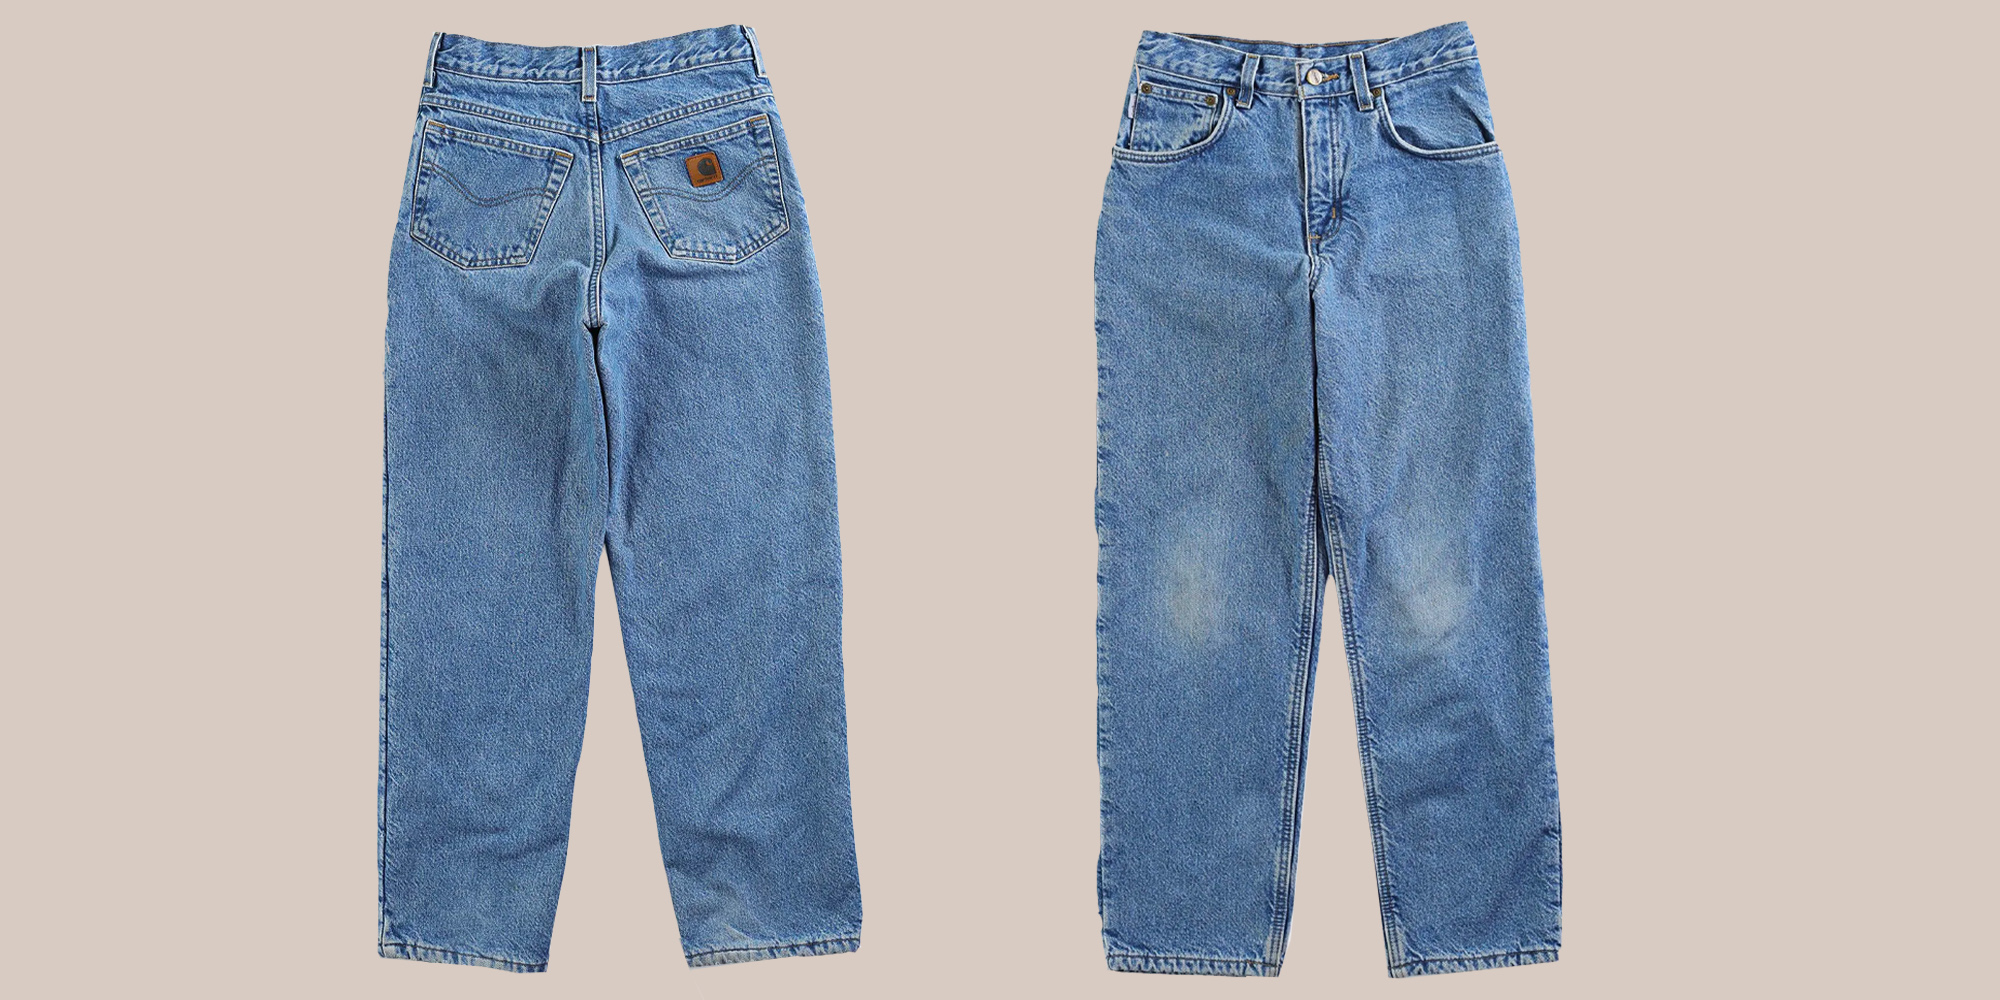 11 Conscious Swaps for Levi’s 501 Denim - Good On You